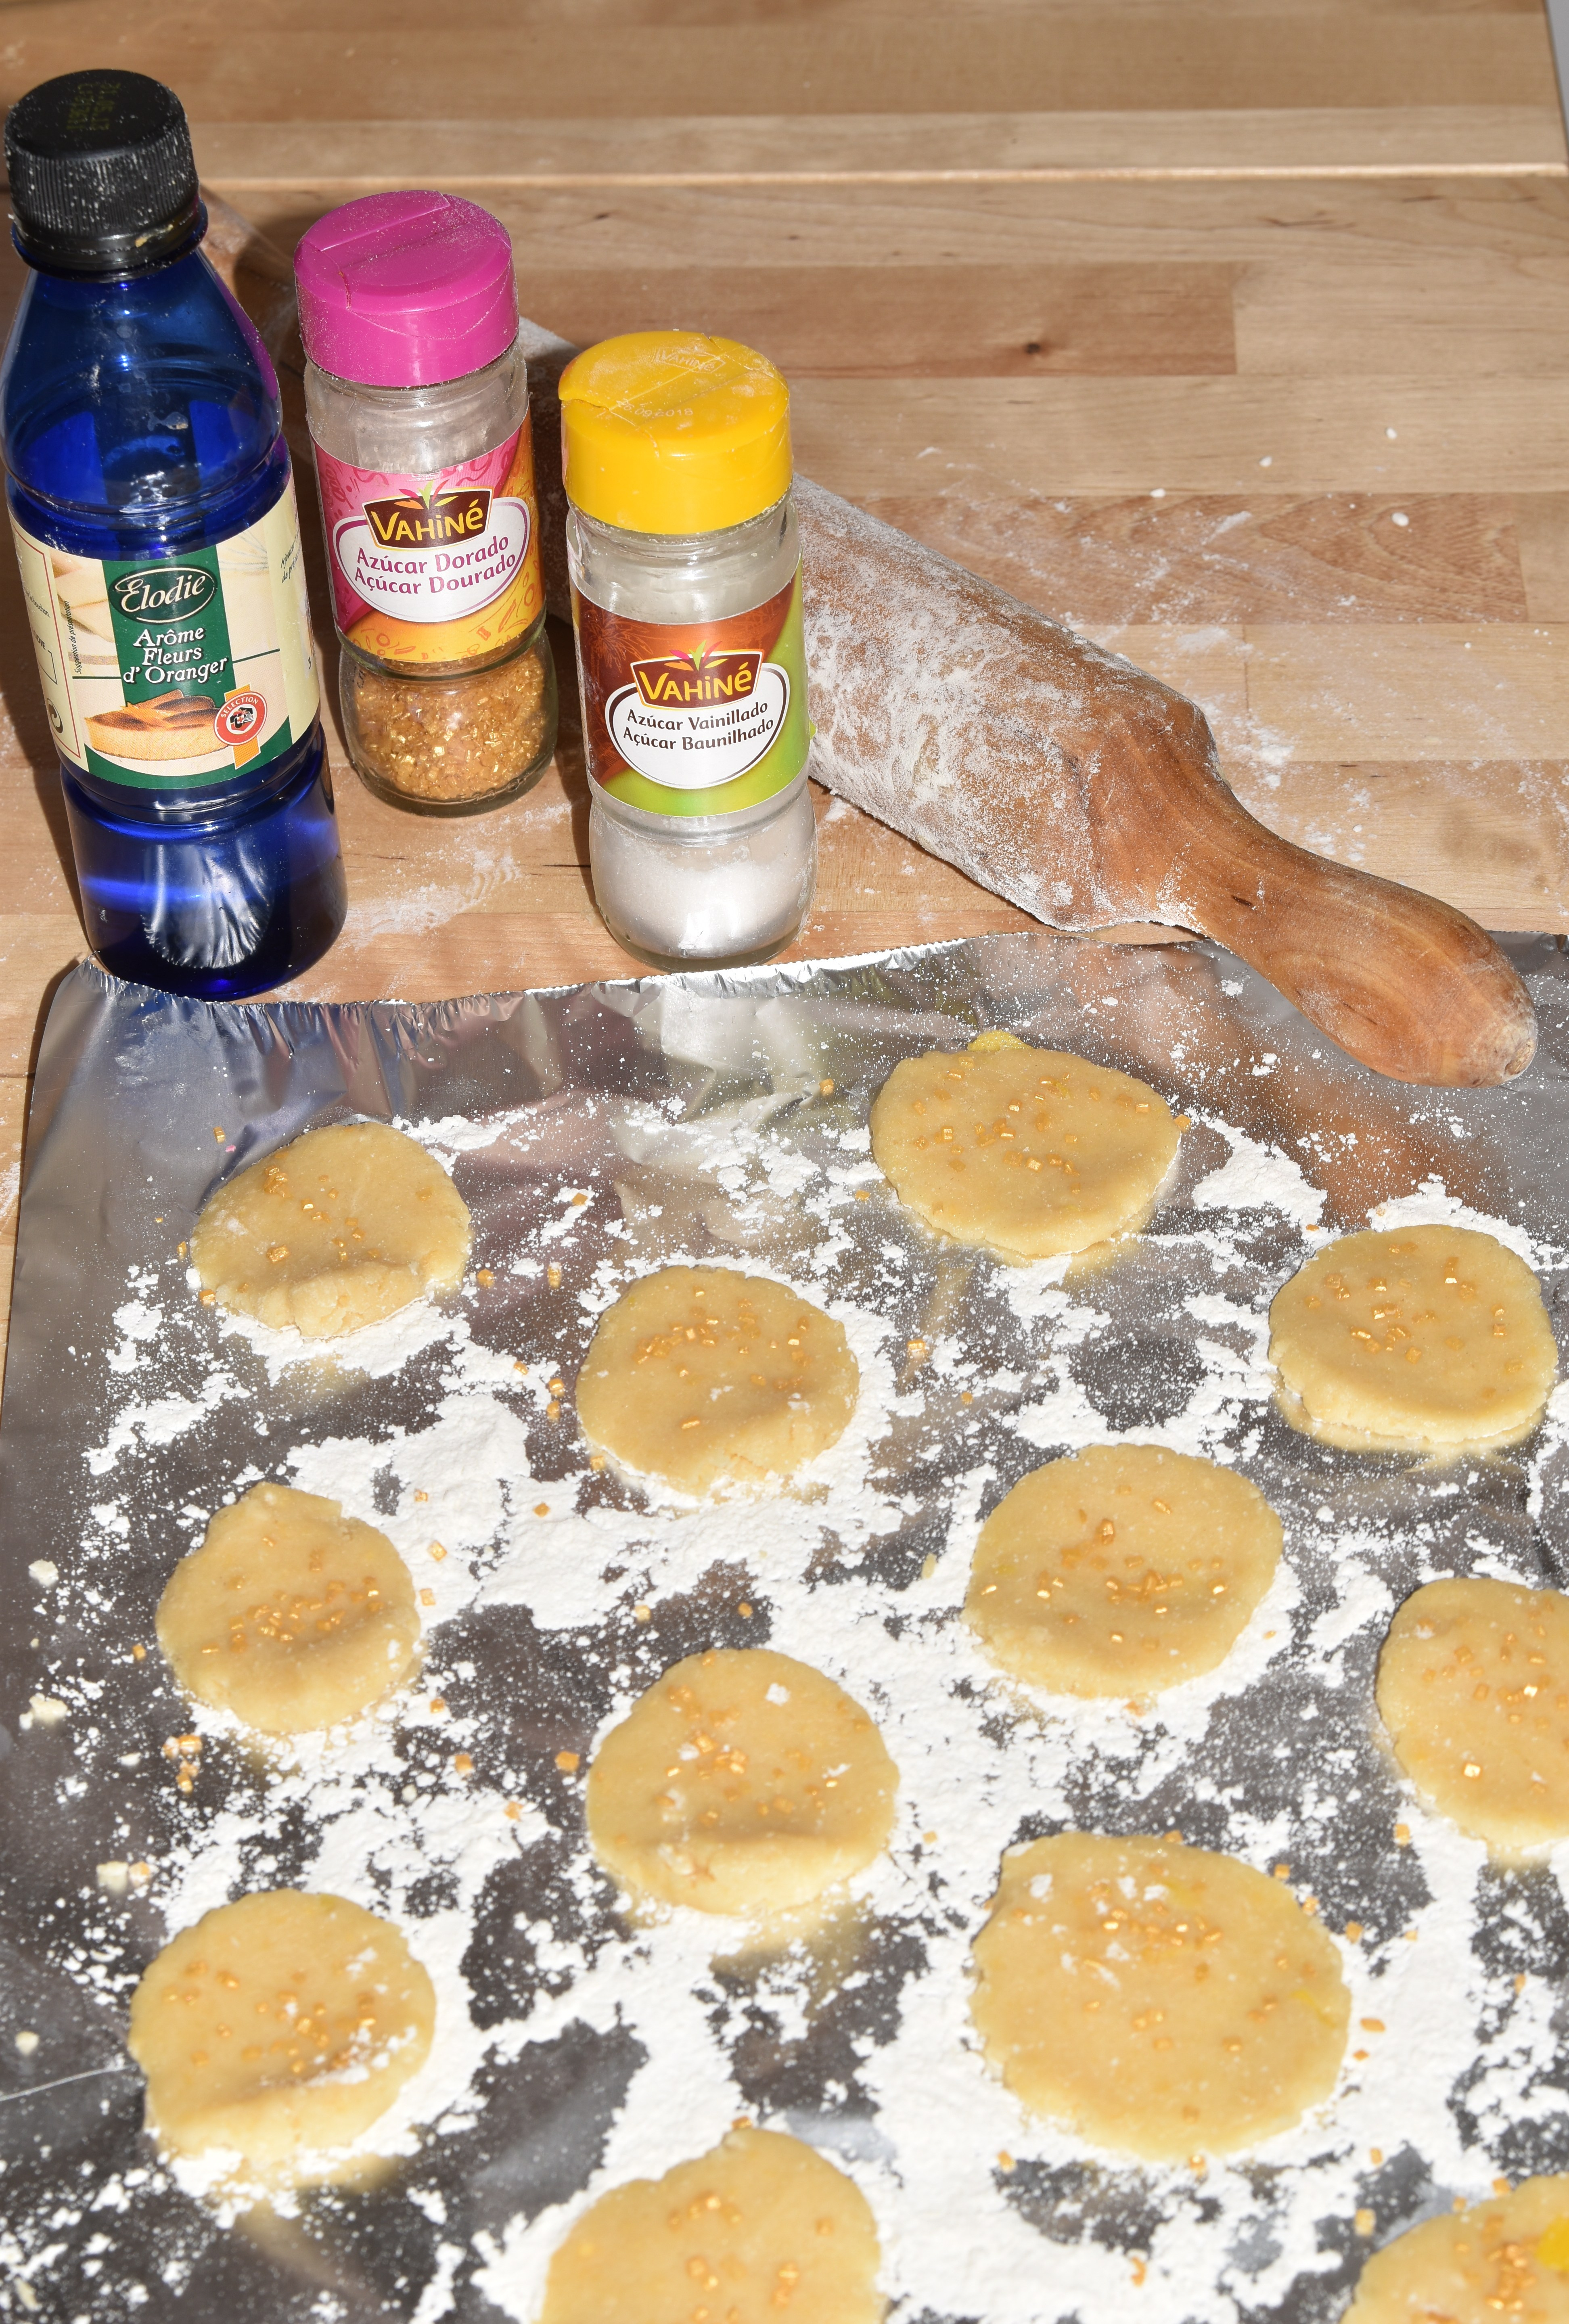 Unbaked cookies laying on a aluminium sheet with flour. Next to it, a plastic bottle of orange blossom water, a golden sugar jar, and a vanilla sugar jar stand next to the rolling pin.